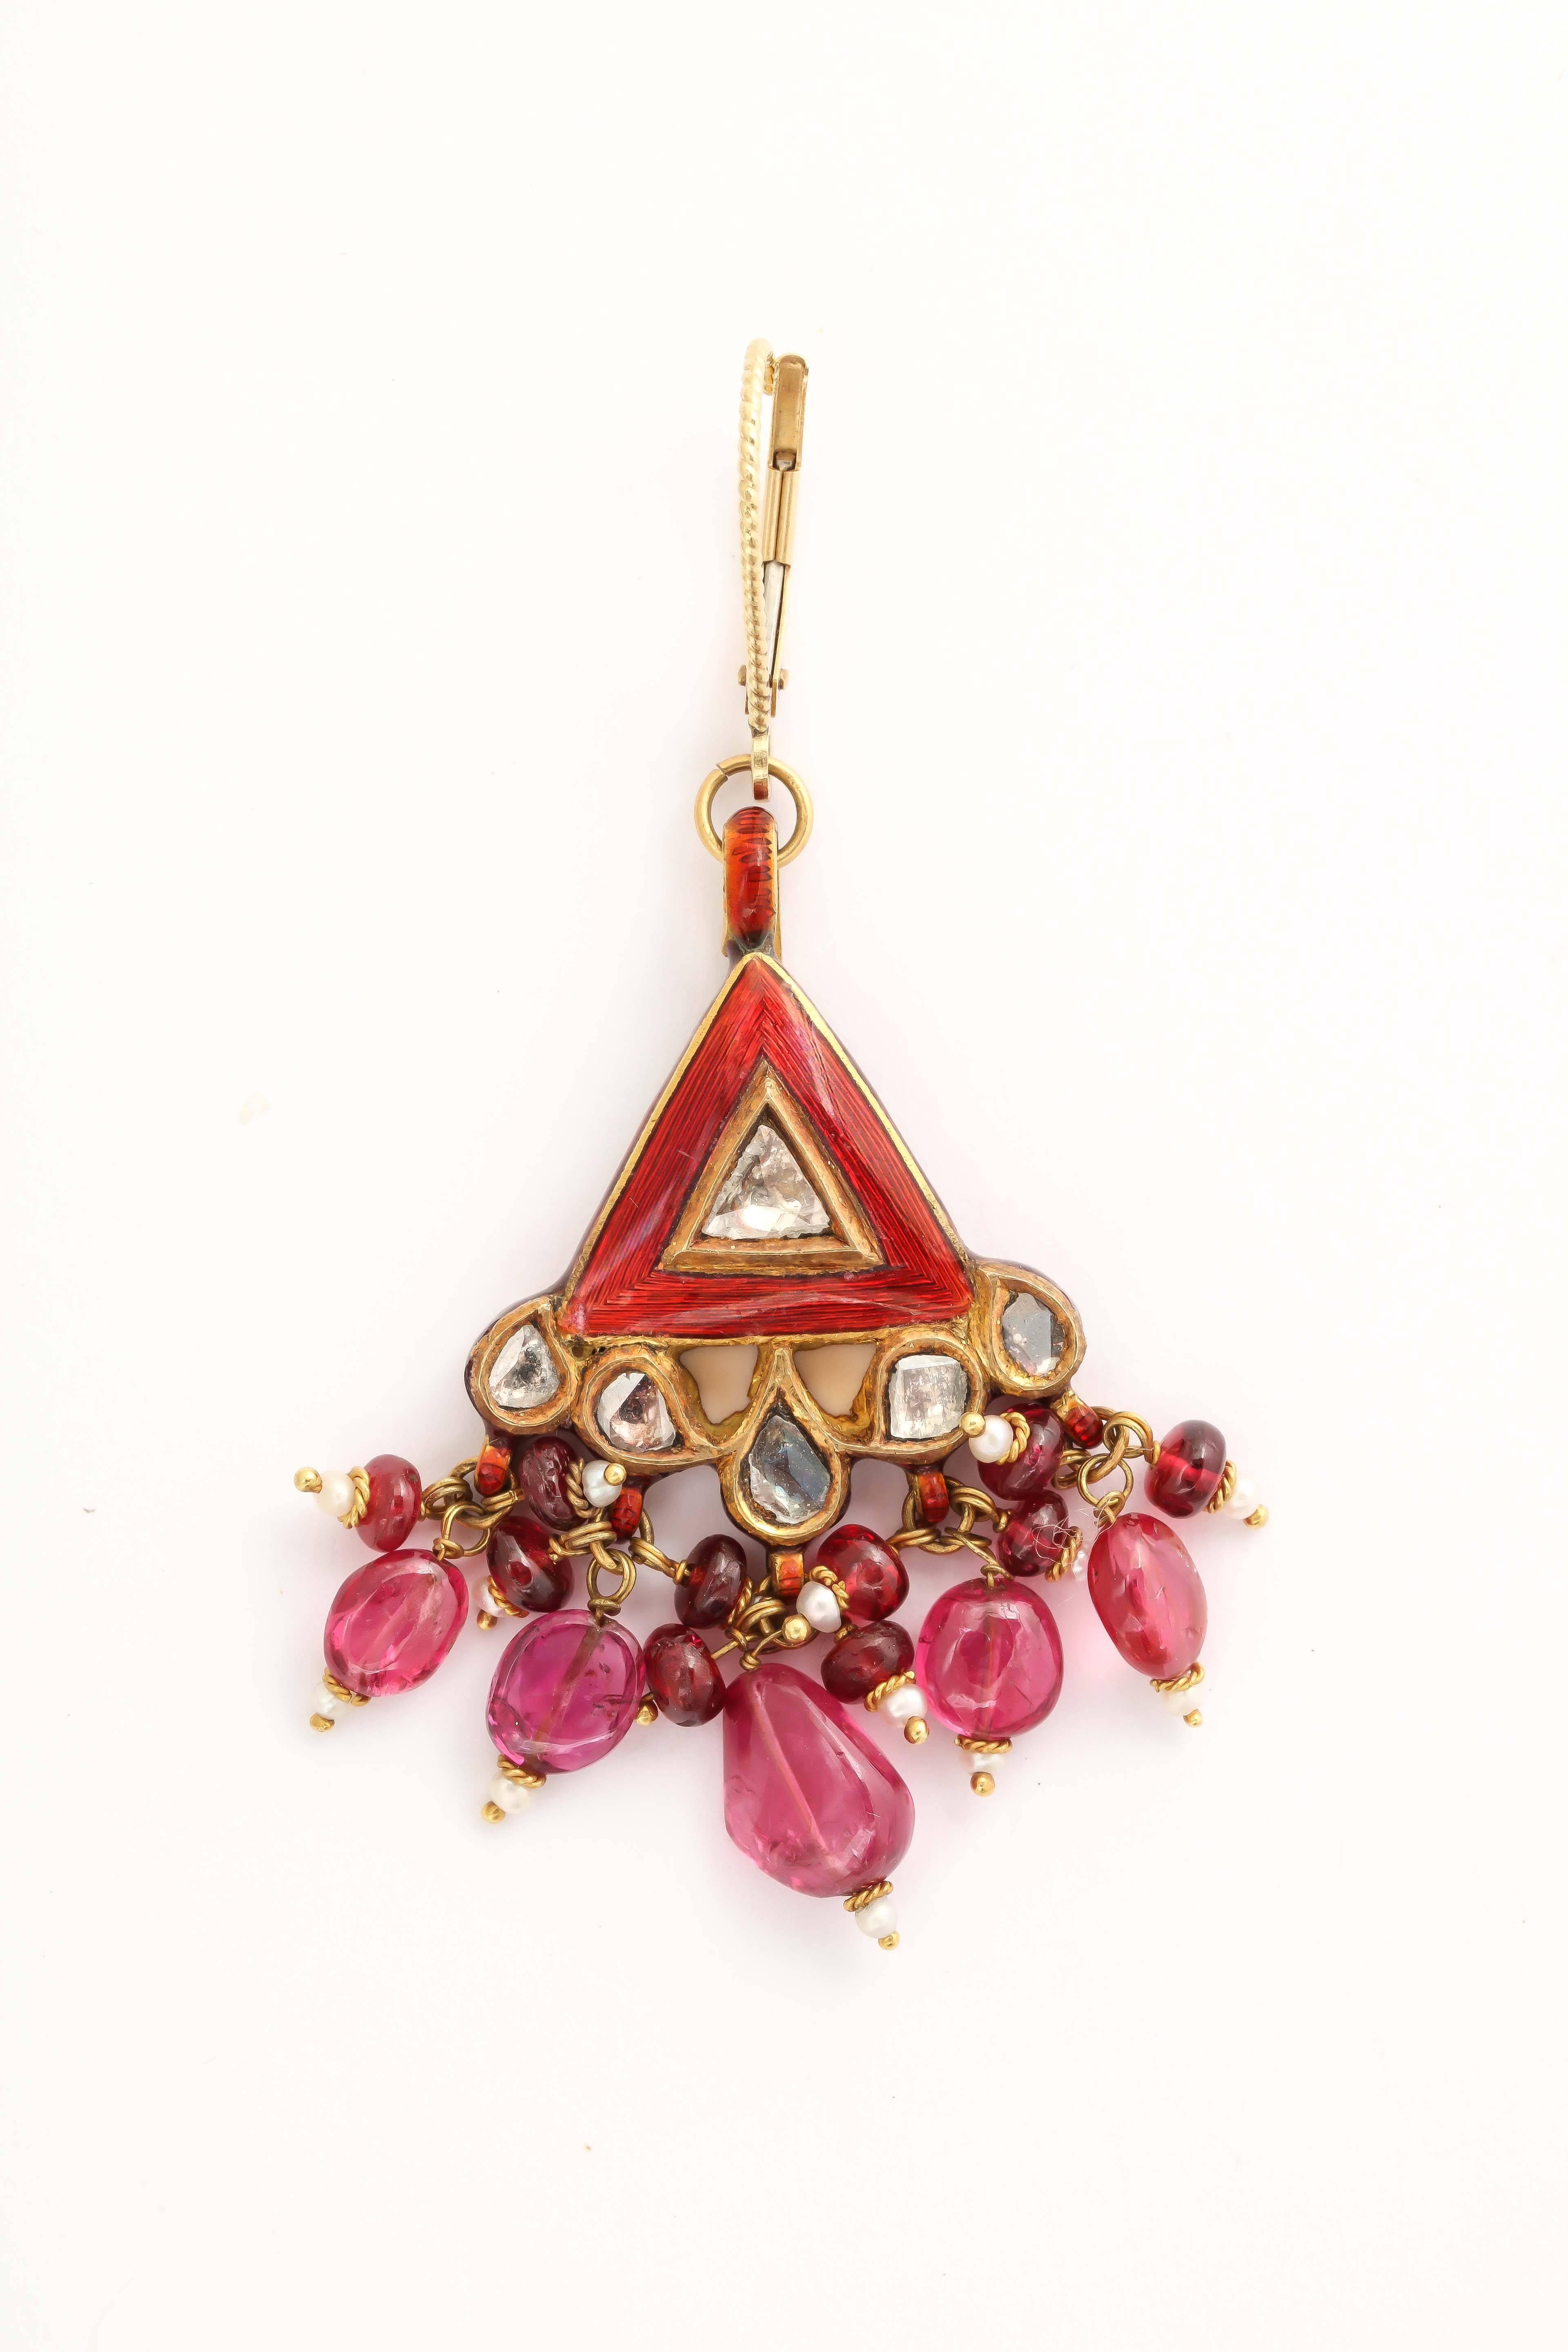 Anglo-Indian Exotic Enamel Ruby Spinel Gold Indian Dangle Earring